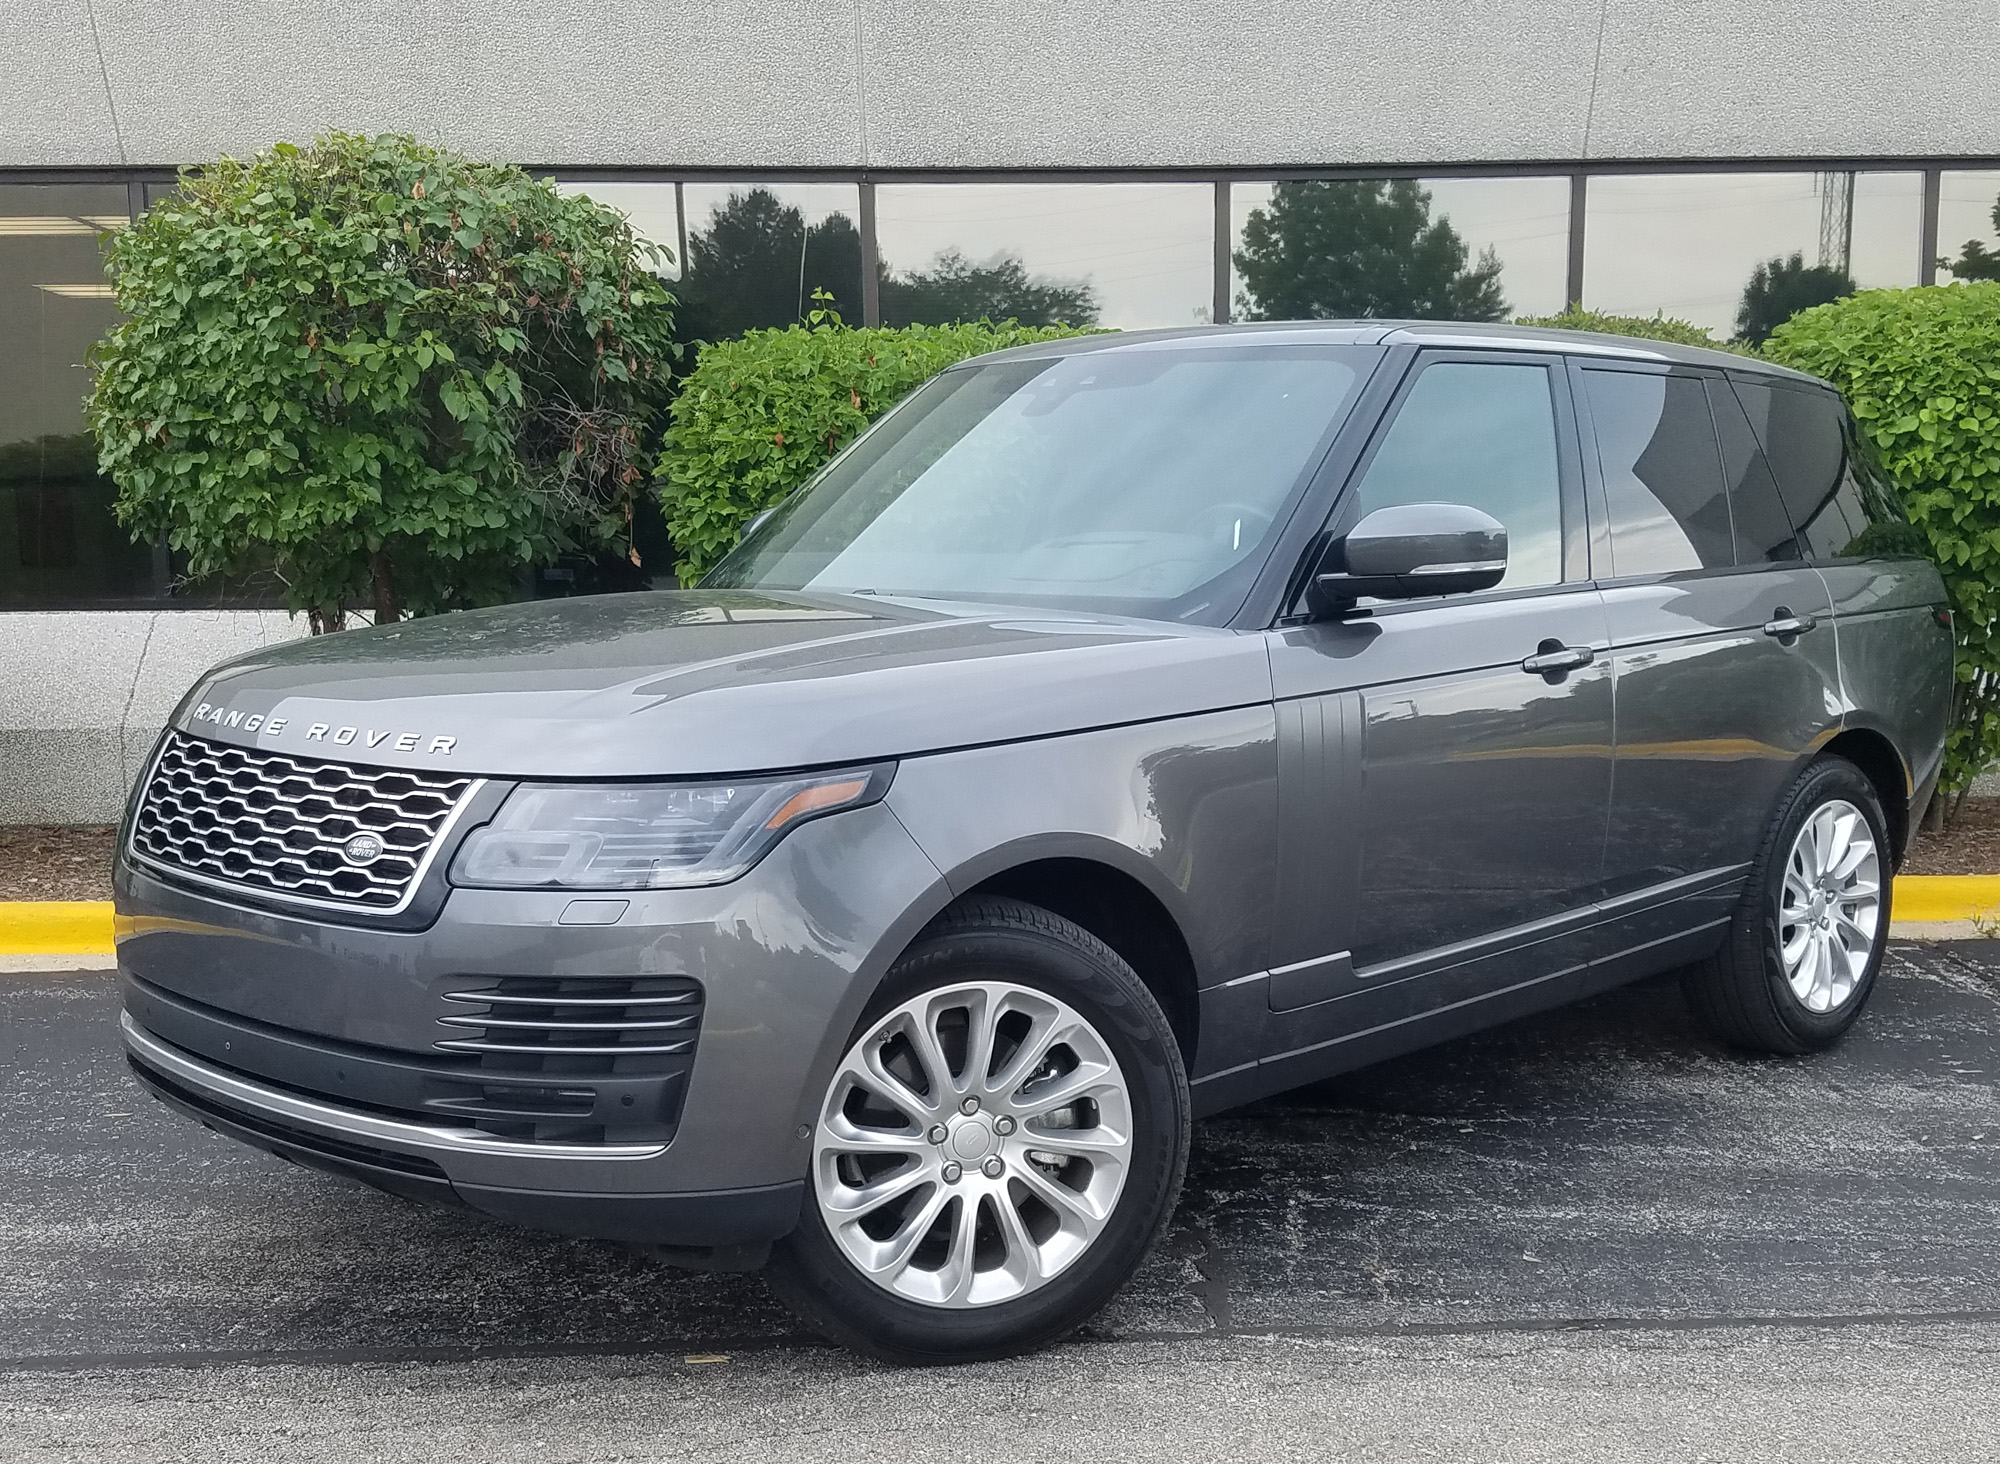 2018 Land Rover Rover HSE Td6 The Daily Drive Consumer